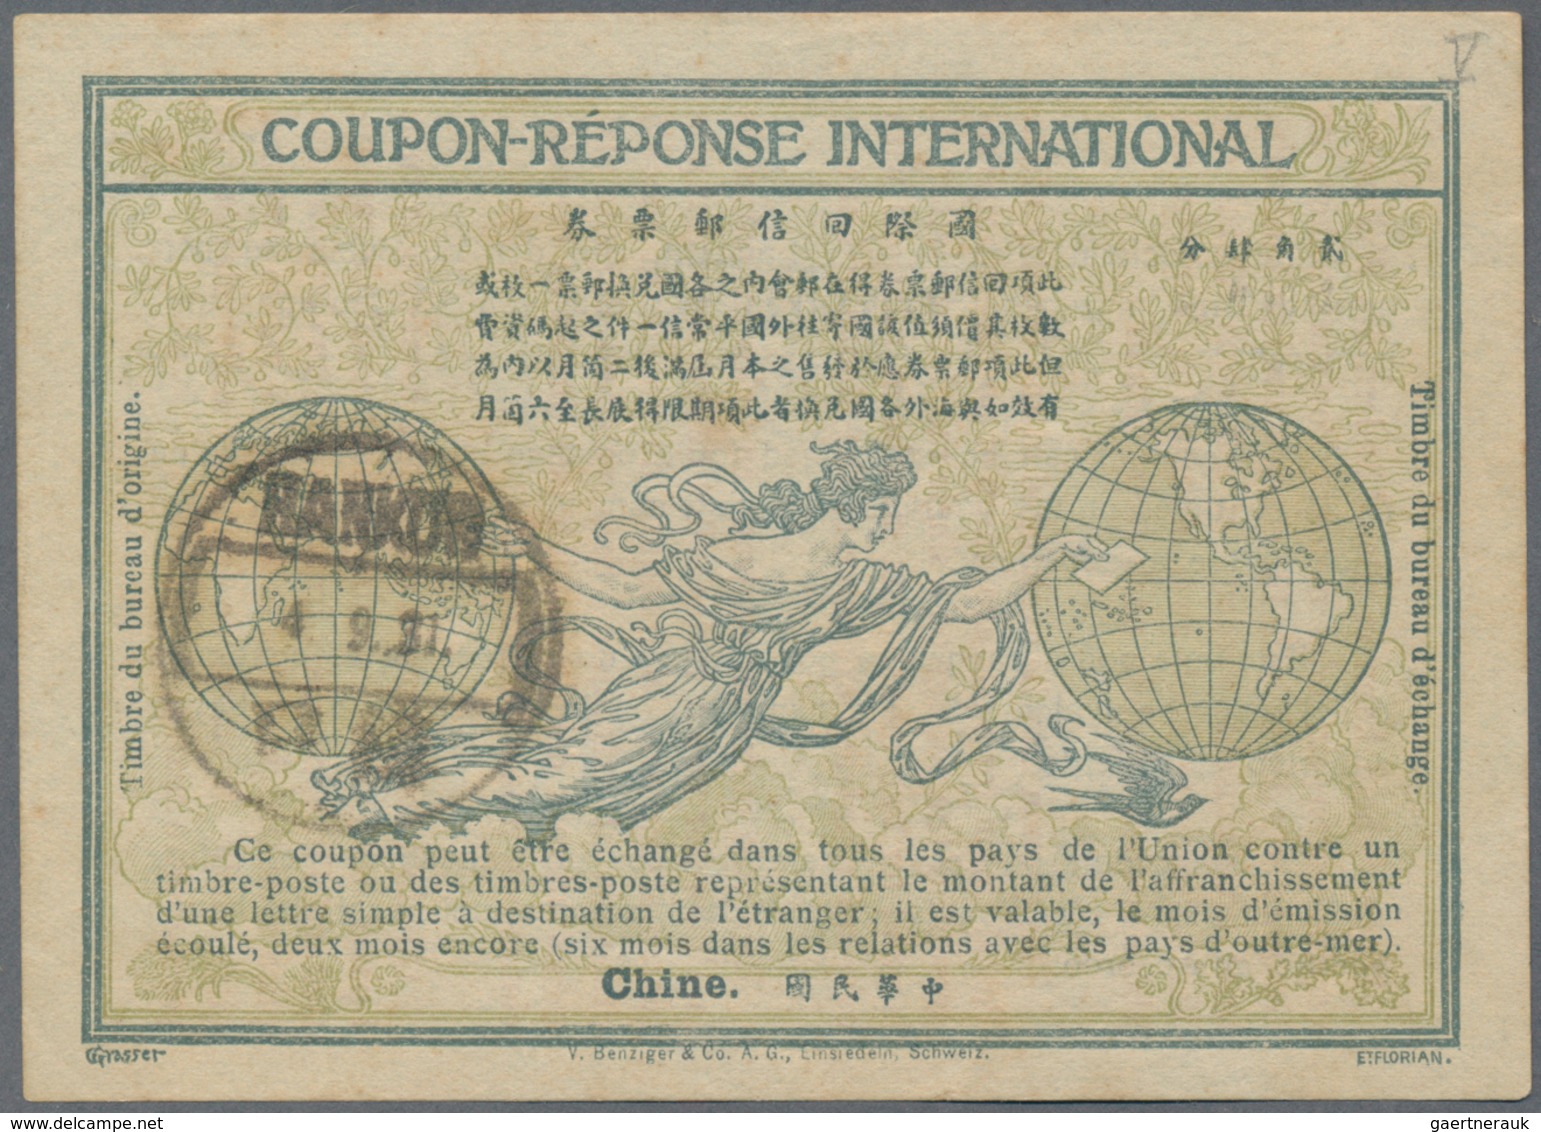 China - Ganzsachen: 1907/30, International Reply Coupons Rome Design, 25 C. Pmkd. "HANKOW 4.9.31" An - Cartes Postales